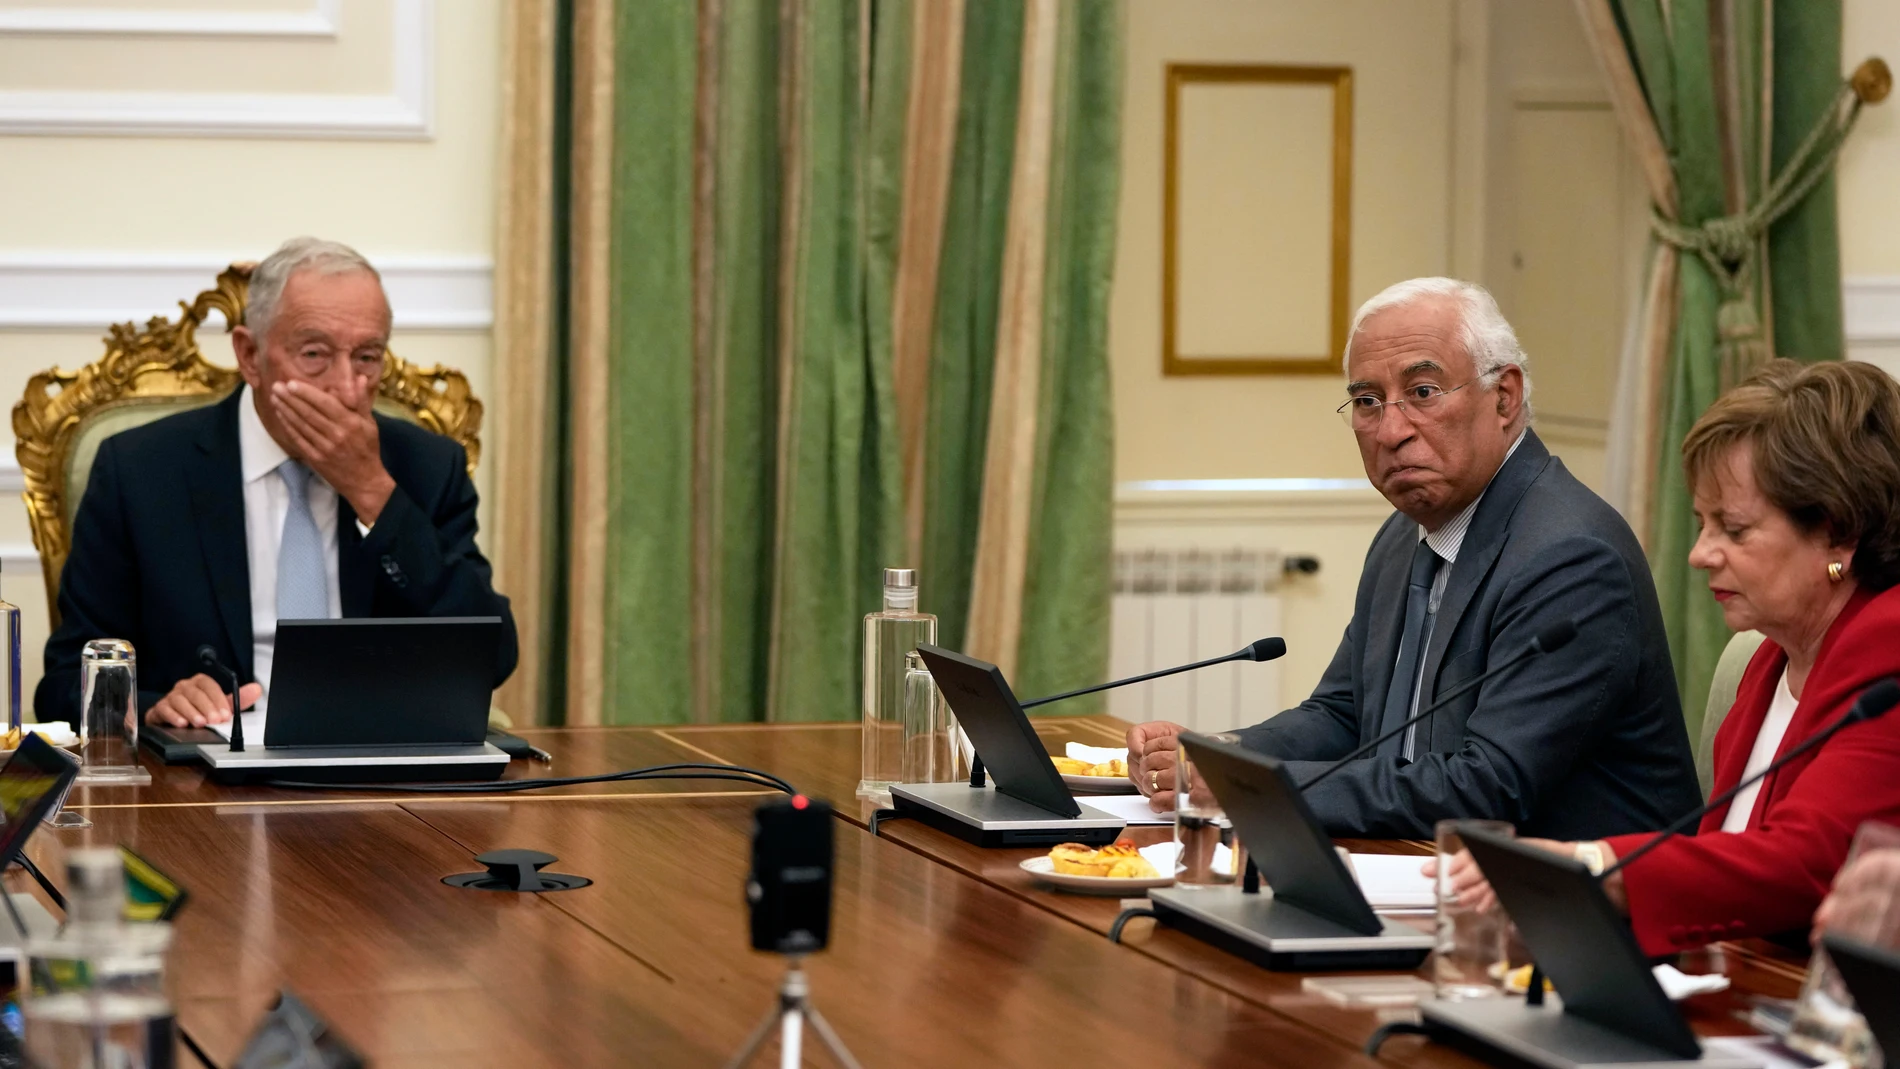 Outgoing Portuguese Prime Minister Antonio Costa, centre, and President Marcelo Rebelo de Sousa, left, attend the State Council meeting called by the president at the Belem presidential palace in Lisbon, Thursday, Nov. 9, 2023. On Tuesday, Prime Minister Costa resigned while his government is involved in a widespread corruption probe. After the council meeting, Rebelo de Sousa is expected to announce if he will call early elections or try to appoint a new prime minister. (AP Photo/Armando Fra...